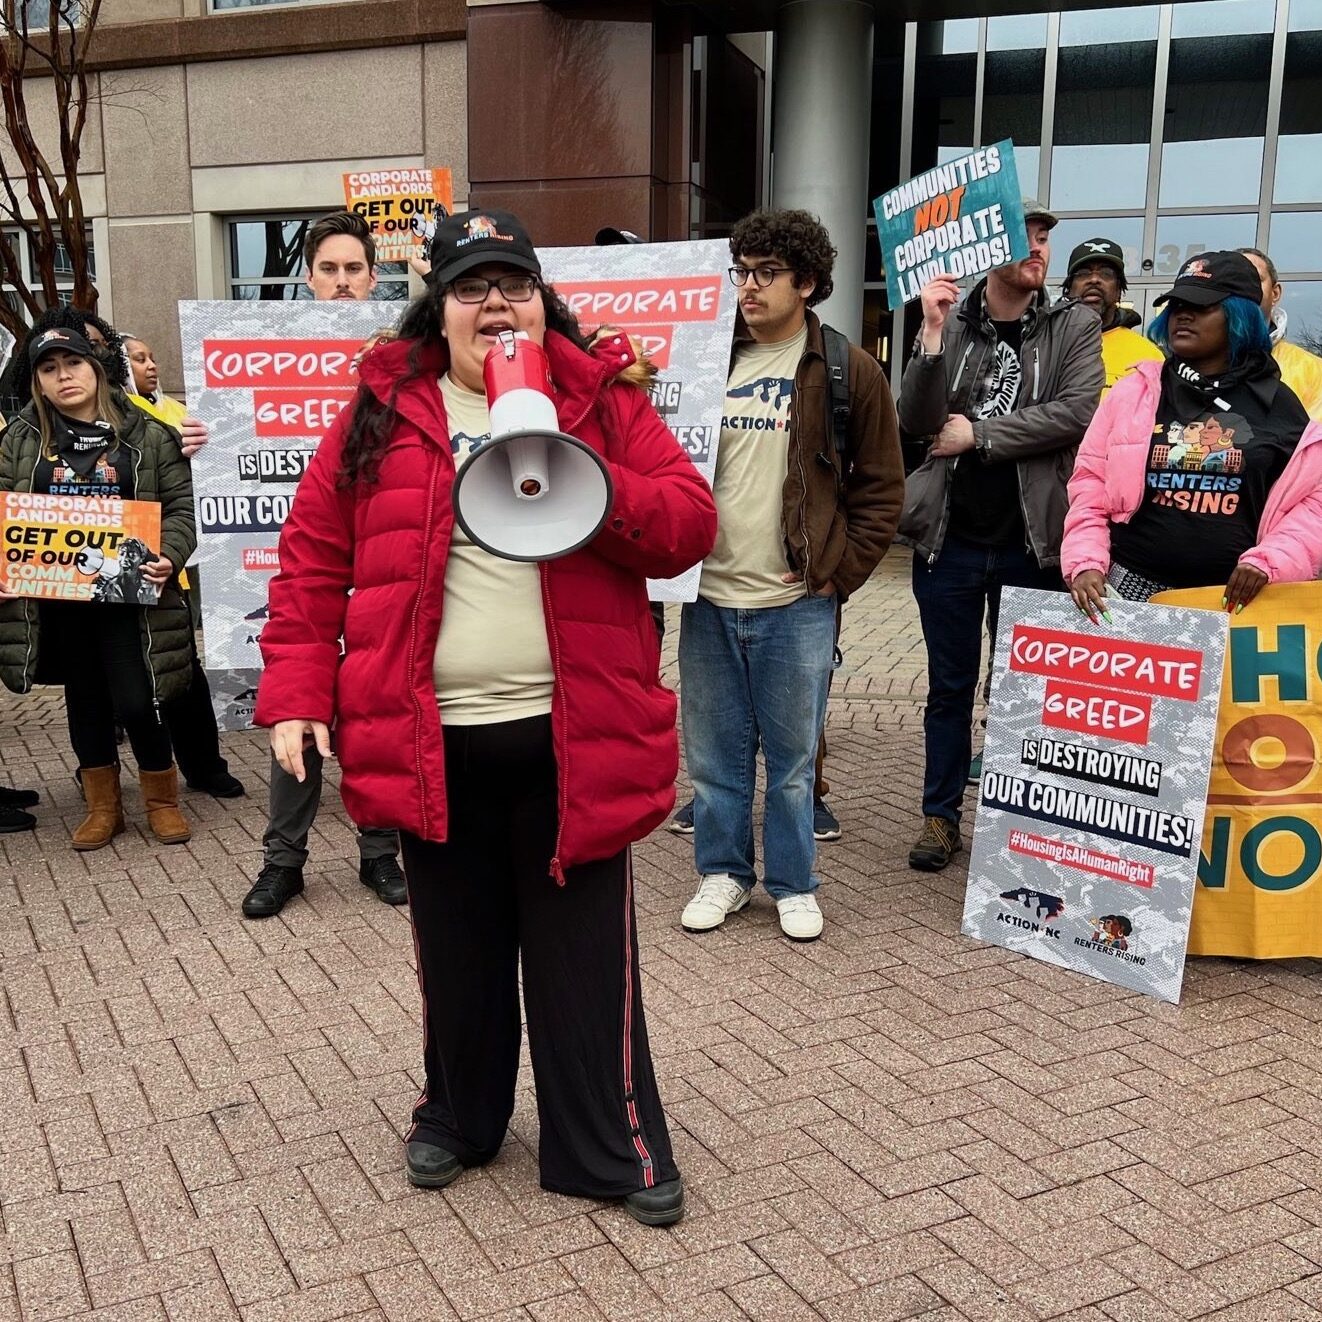 Tenant organizing resource center members at a protest outside a corporate landlord office